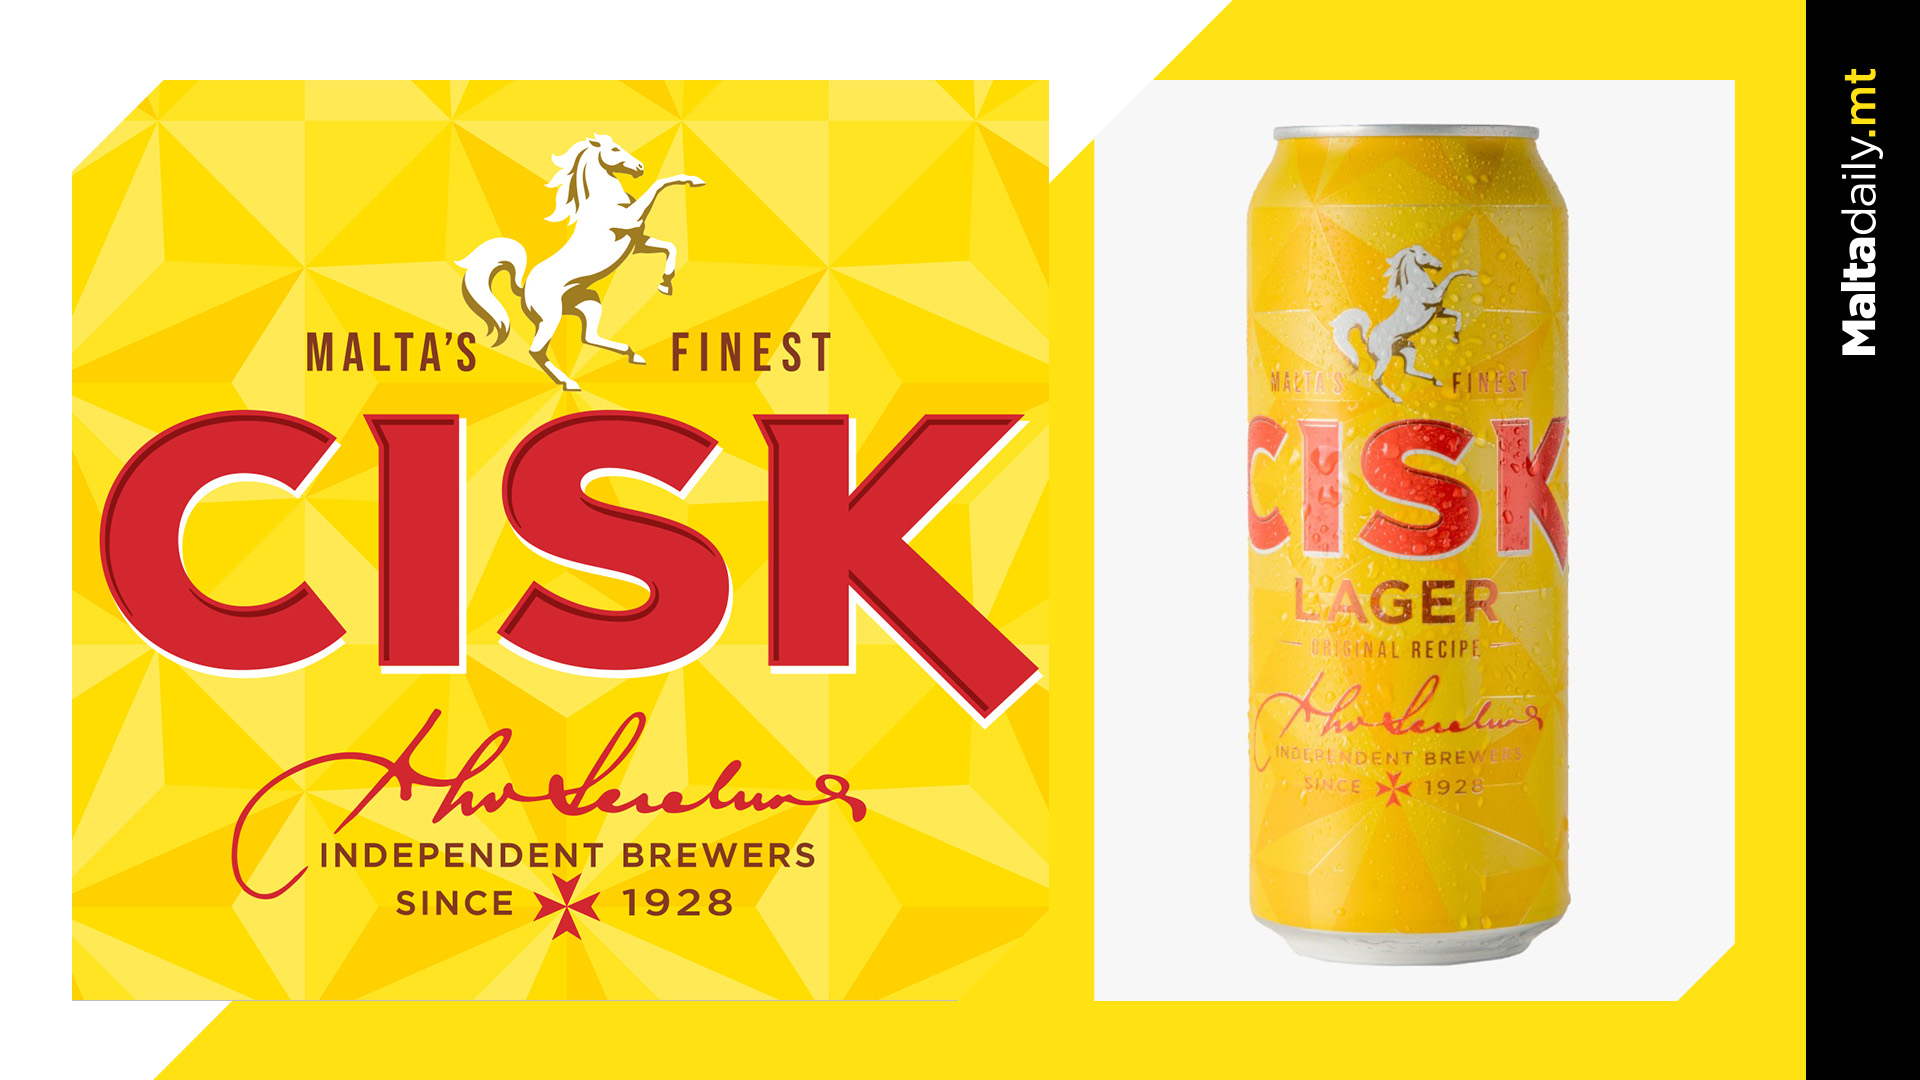 Bold new brand look for Malta’s iconic beer brand Cisk